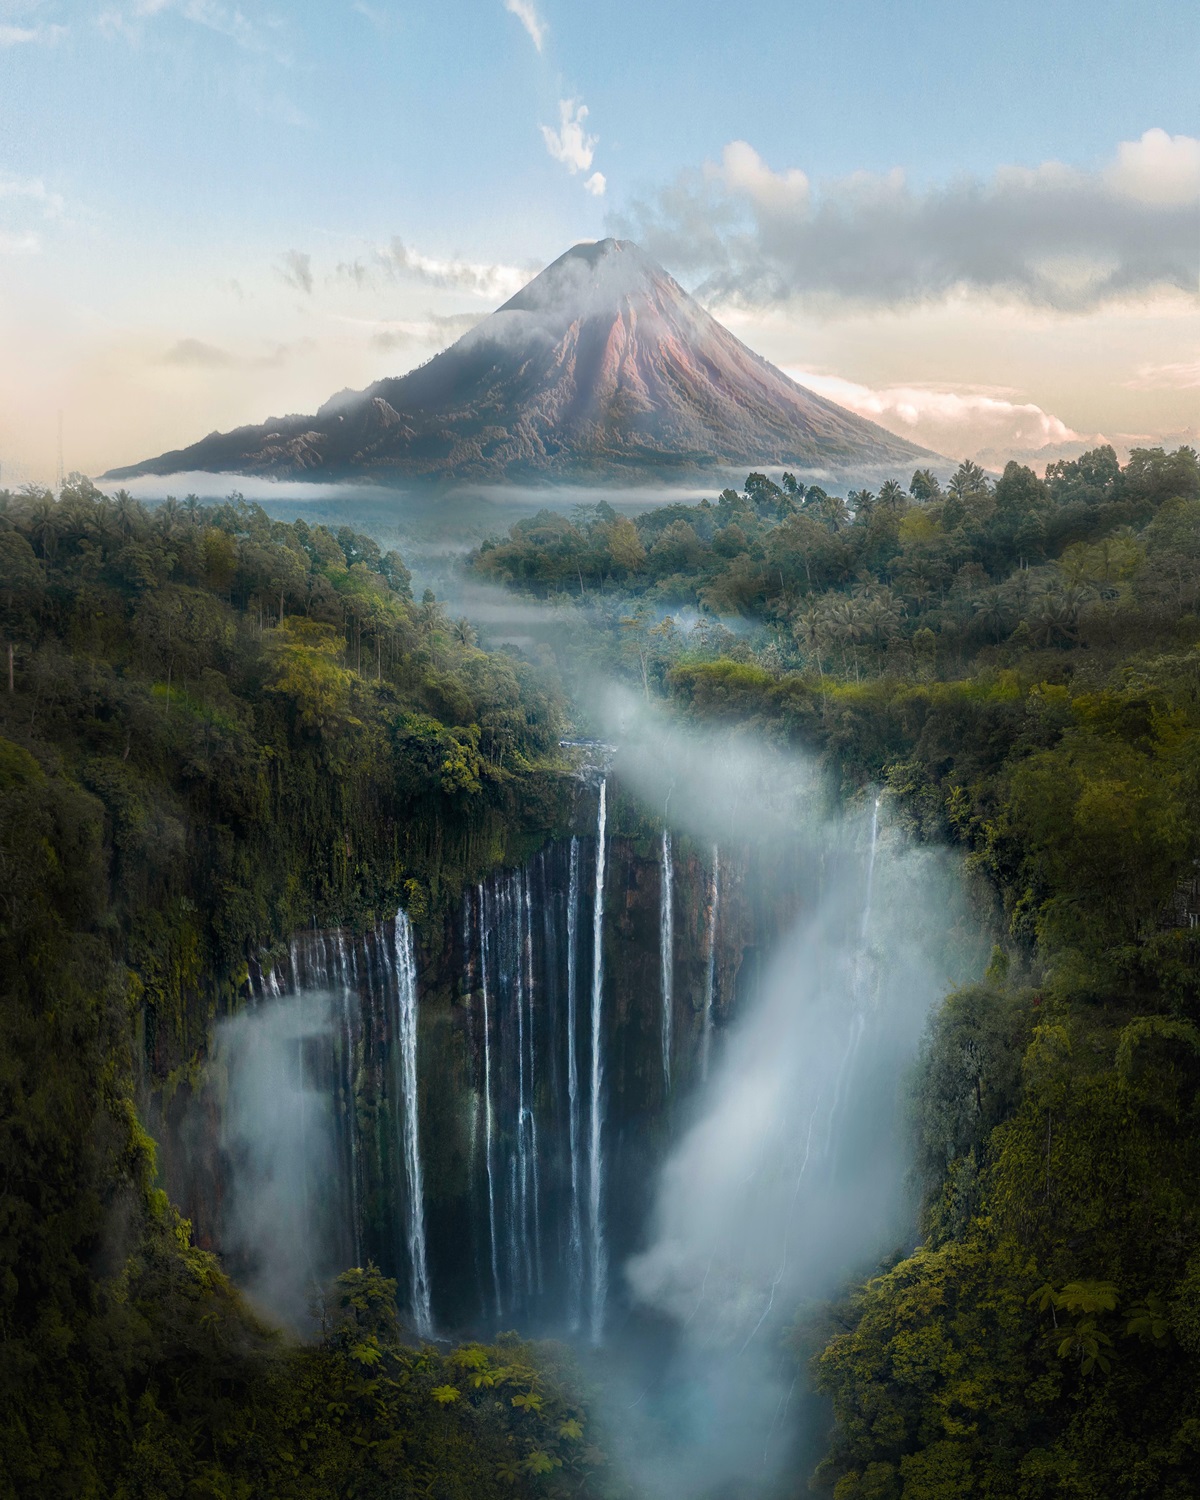 You Might Have Seen It Before, But Here's That One Place In Indonesia With A Volcano Behind Waterfalls